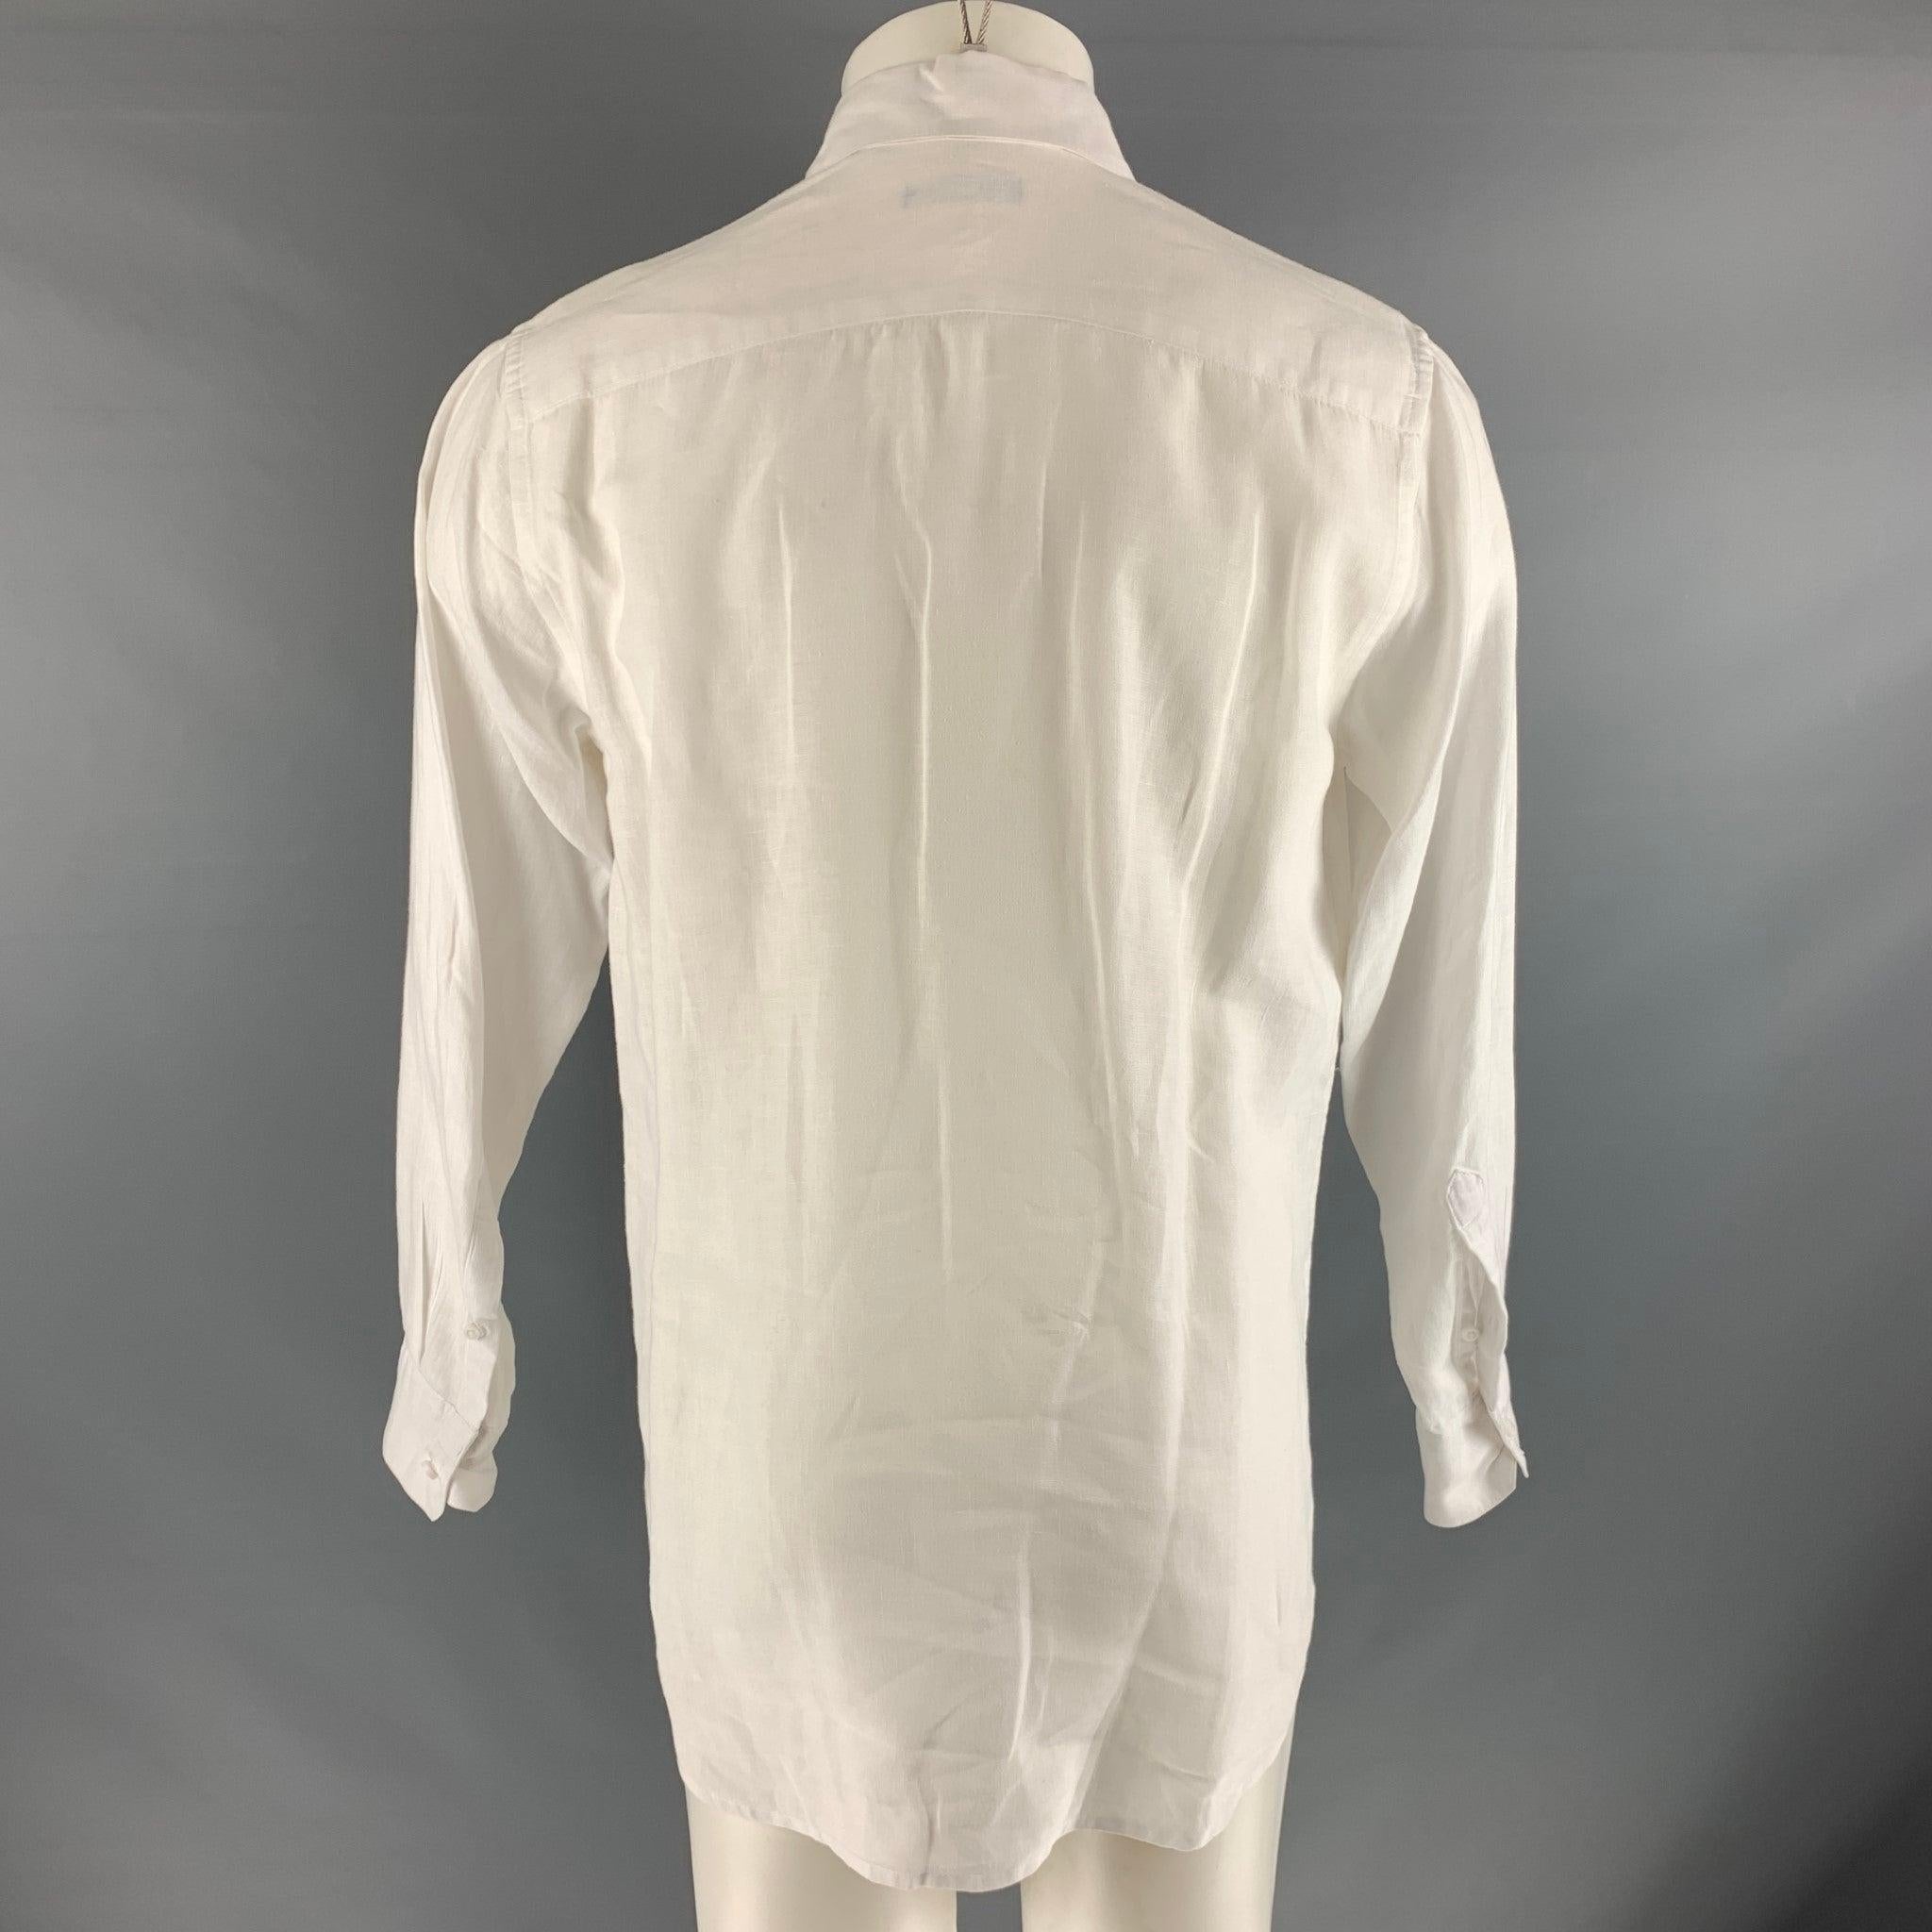 SAKS FIFTH AVENUE Size S White Solid Linen Button Up Long Sleeve Shirt In Good Condition For Sale In San Francisco, CA